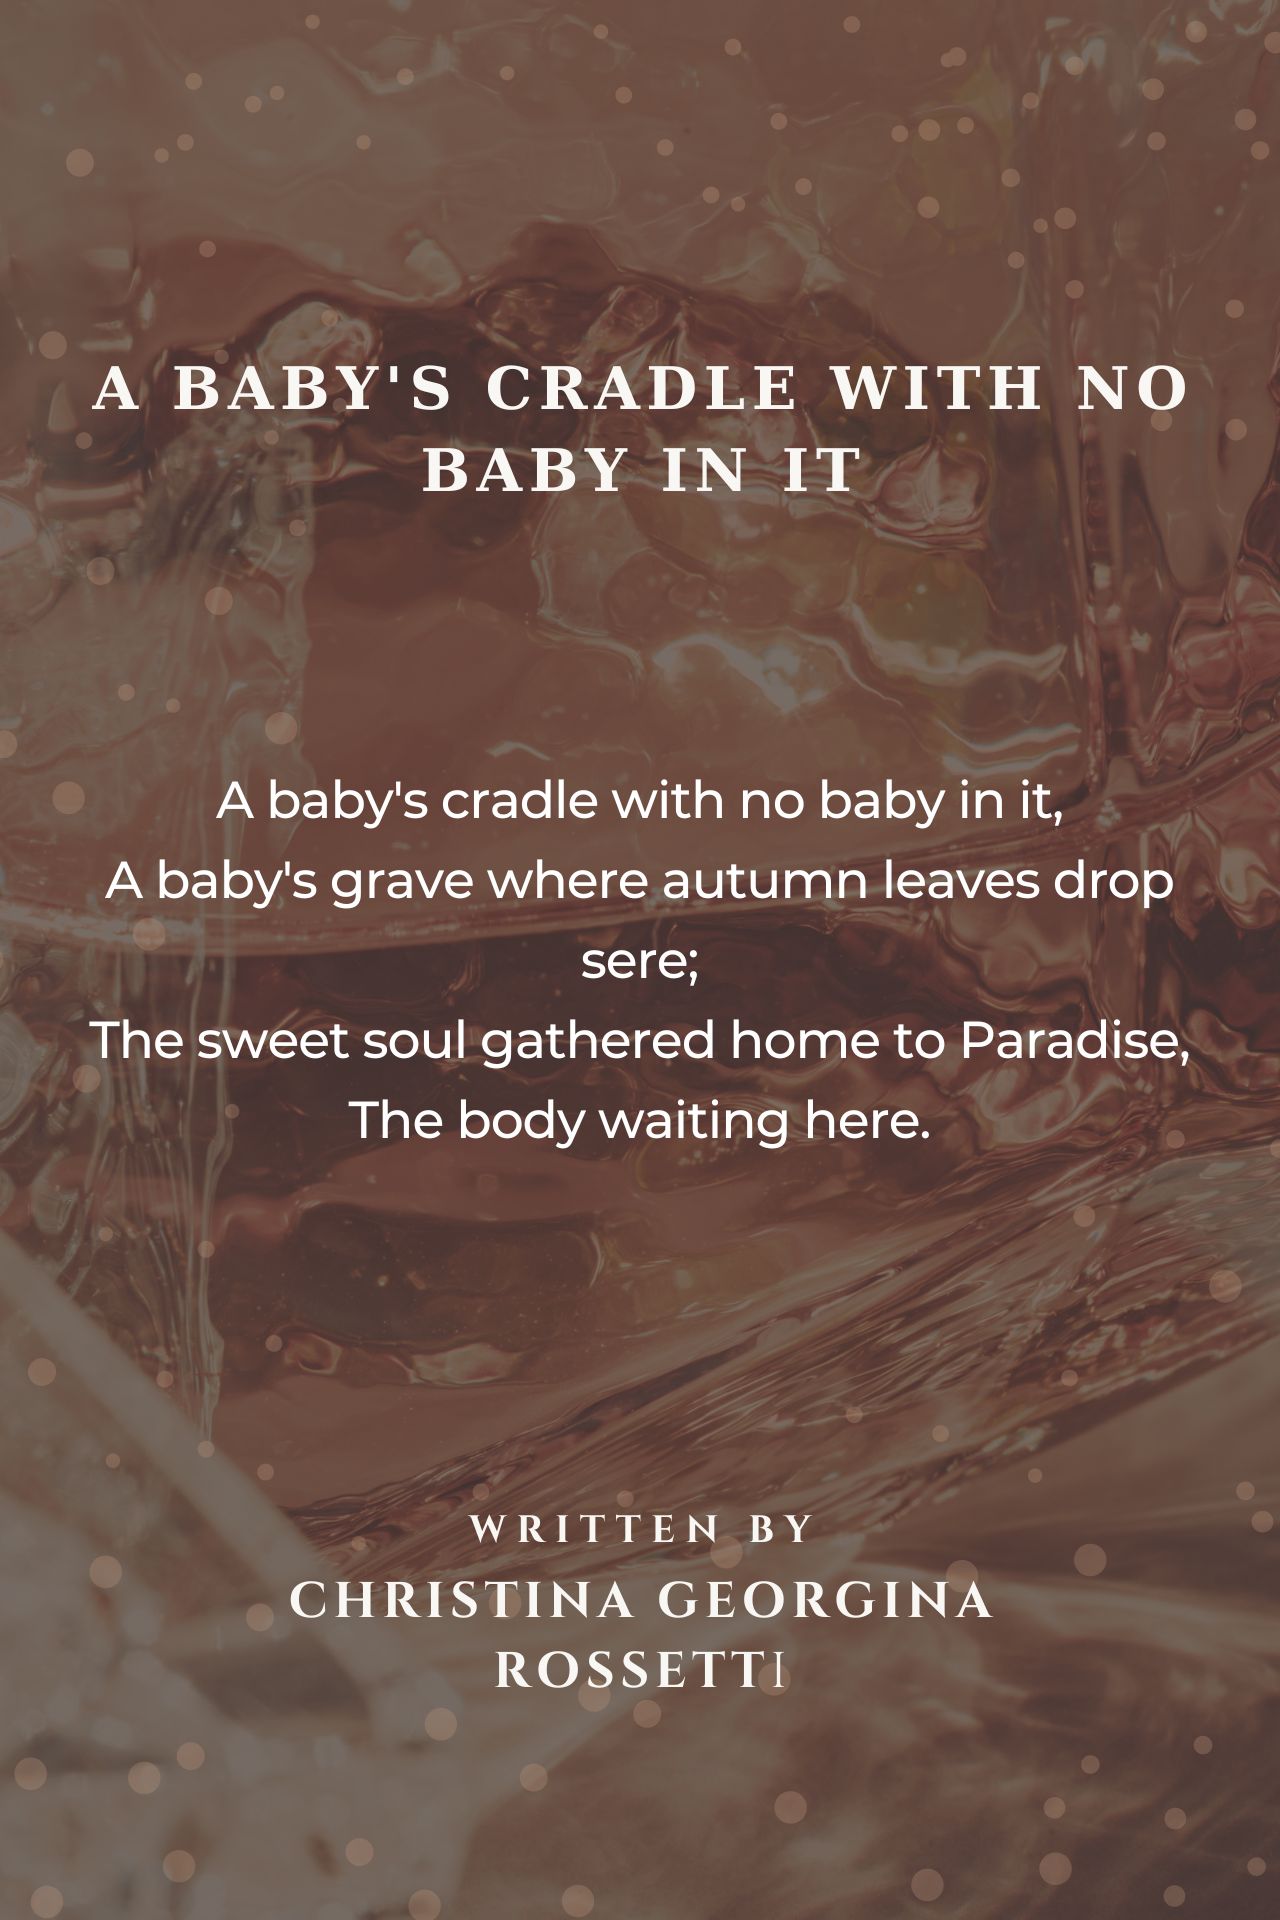 A Baby's Cradle With No Baby In It